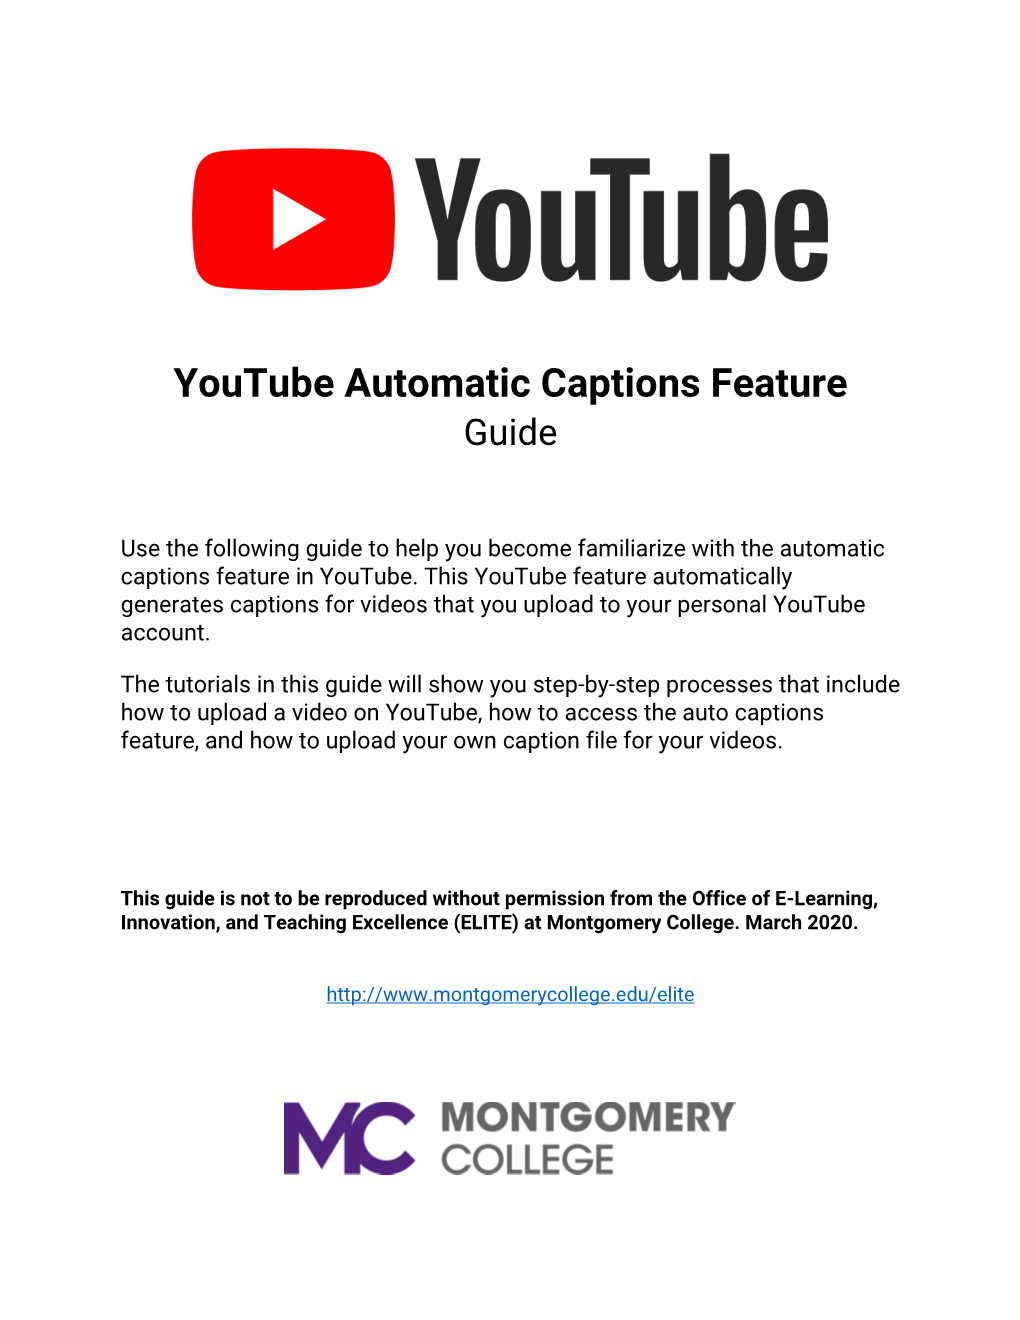 youtube automatic captions not available